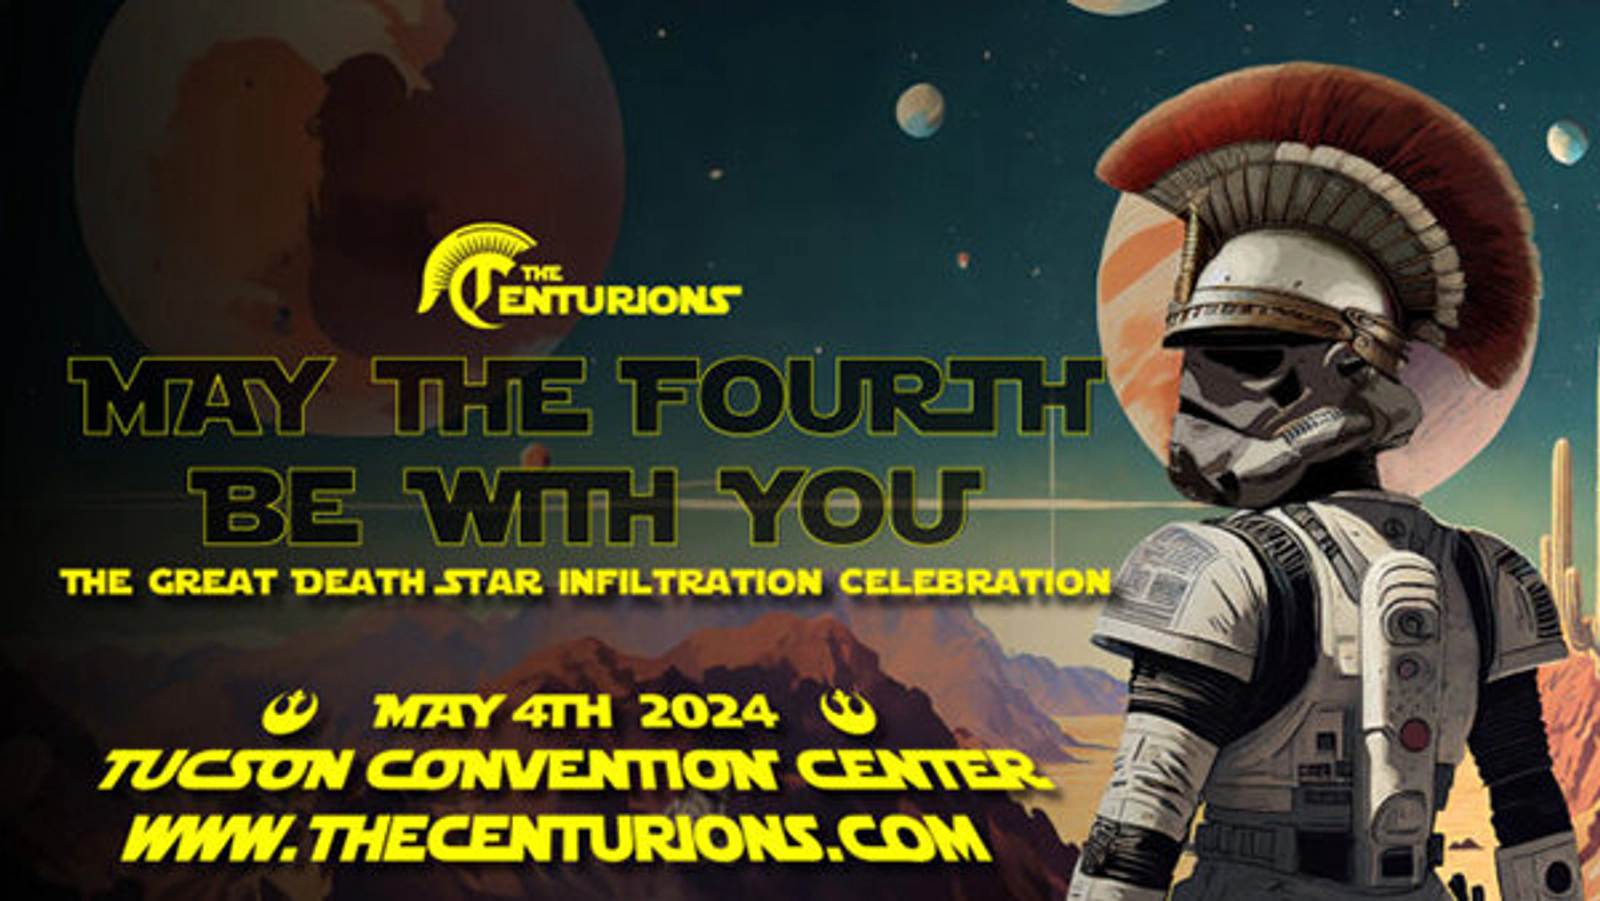 Win tickets to The Centurions "May The Fourth" Celebration - Thumbnail Image